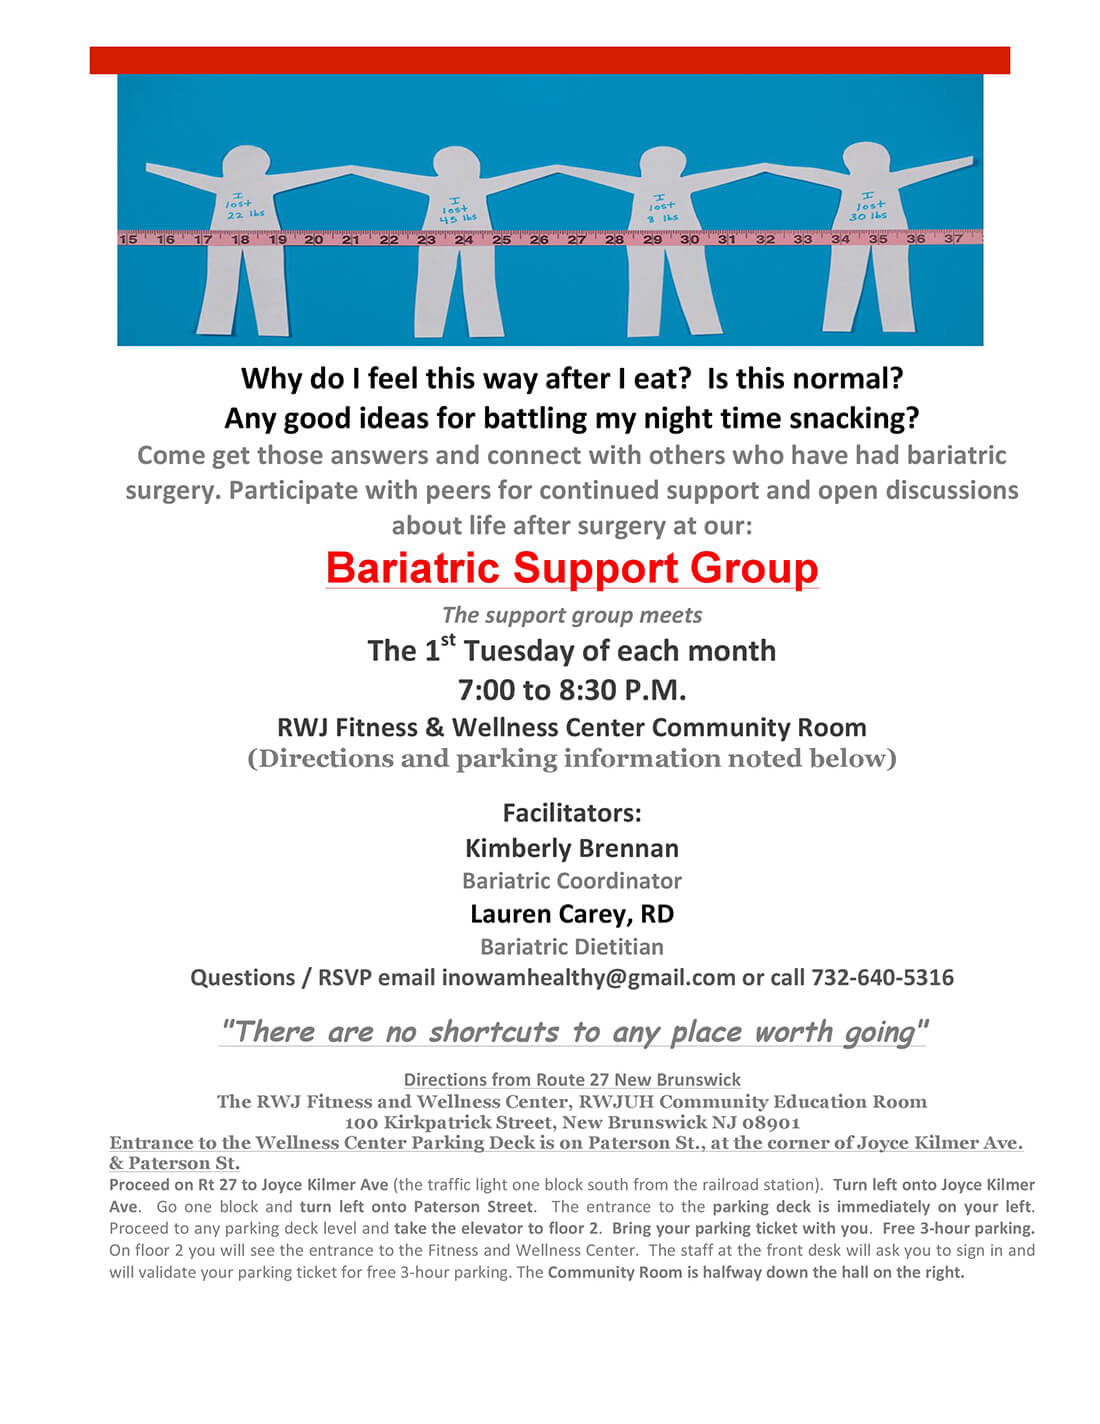 2014 Bariatric Support Group Page